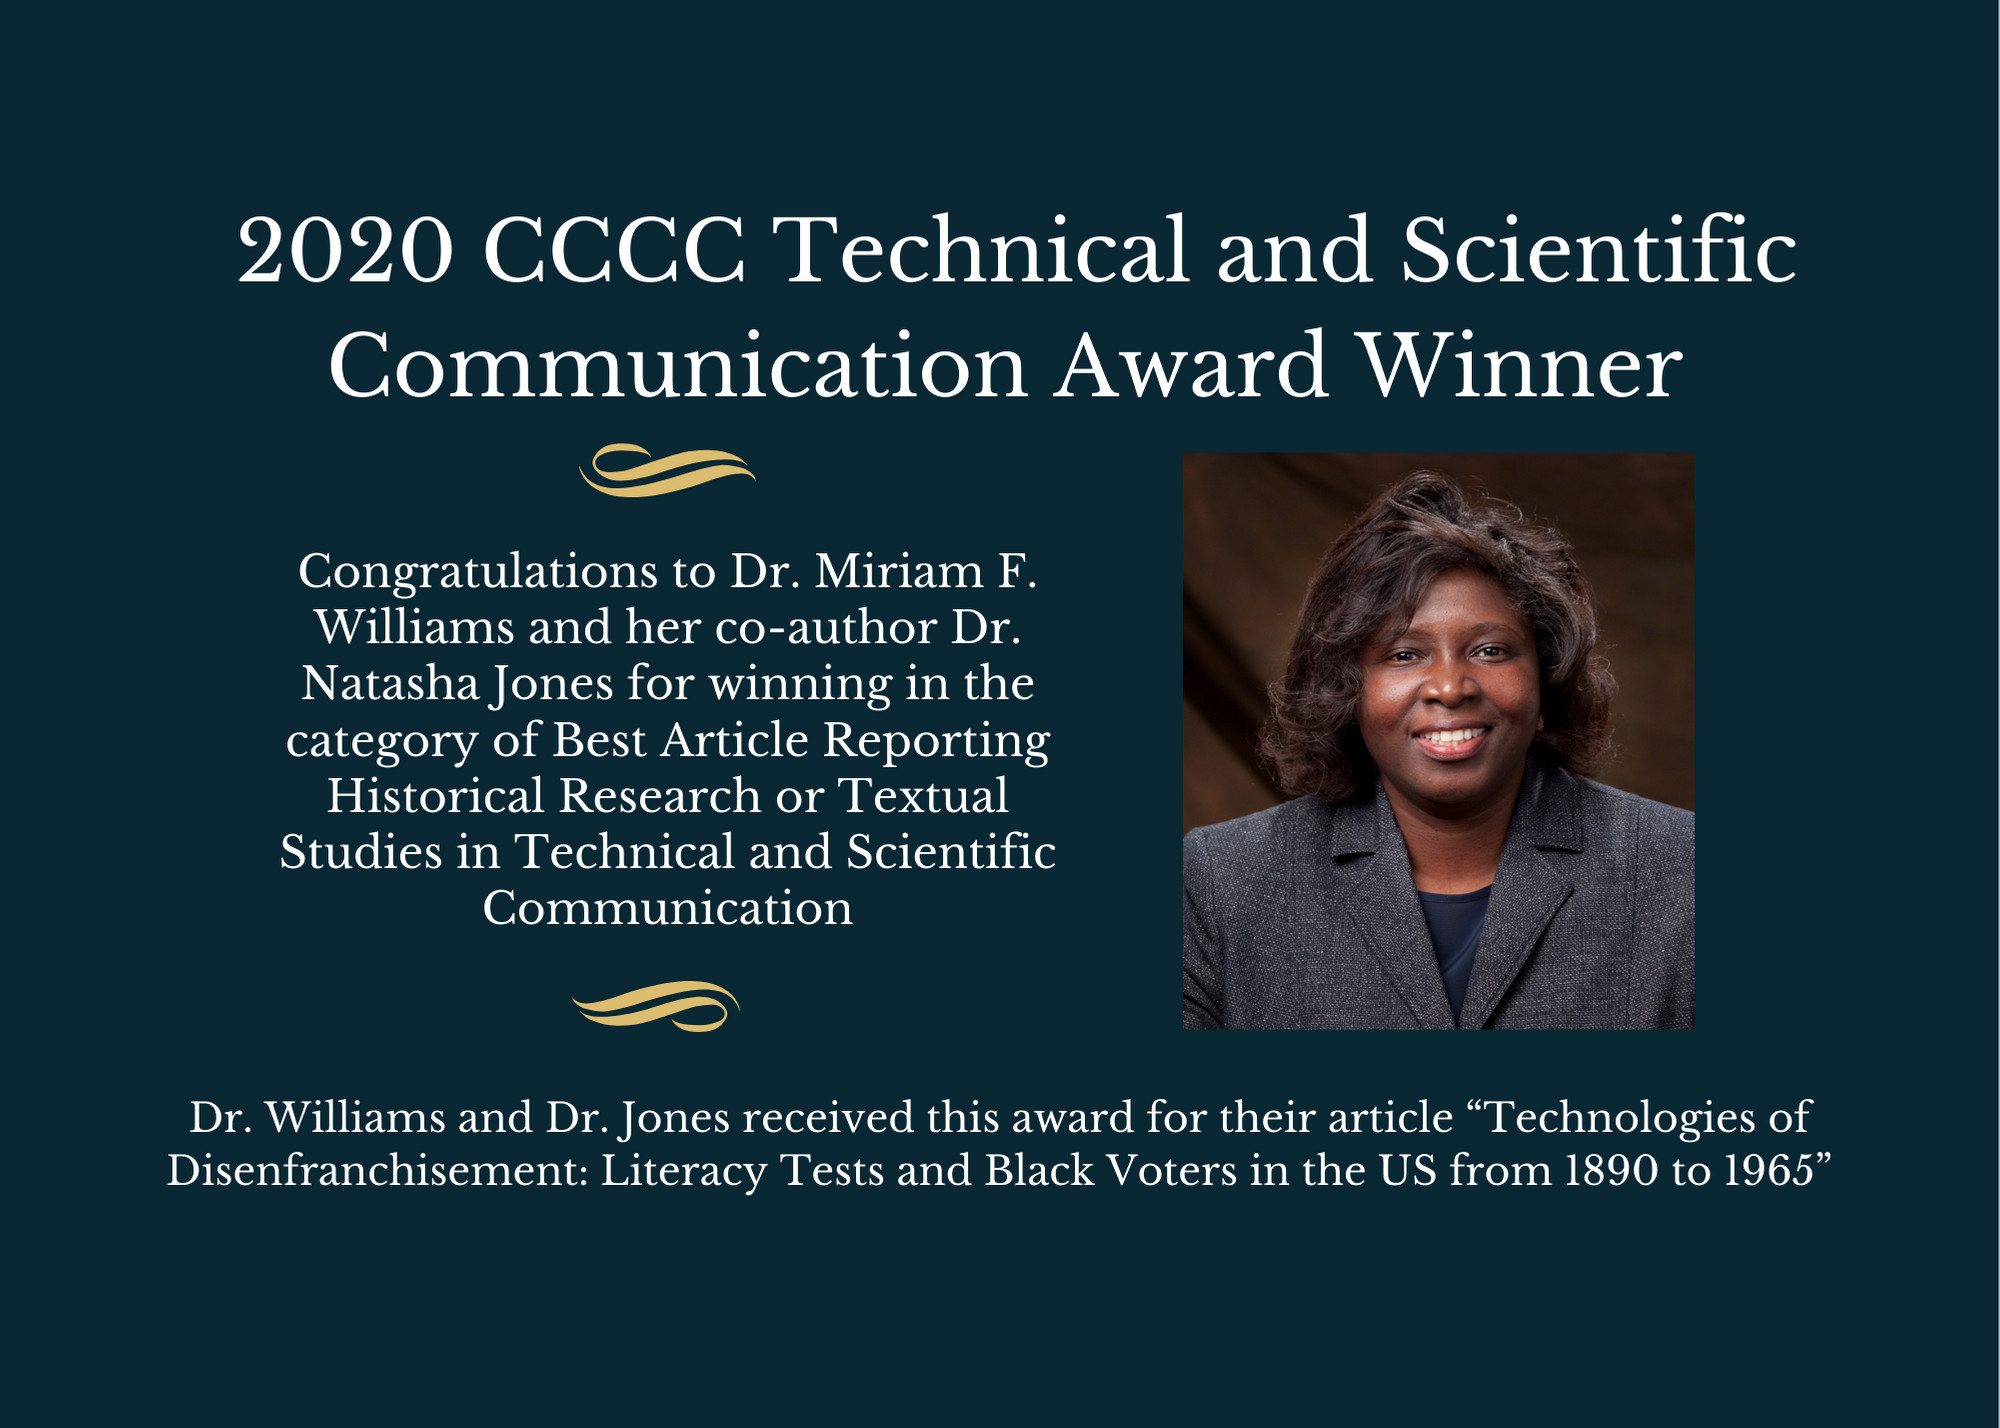 Dr. Williams CCCC Technical and Scientific Communication Award